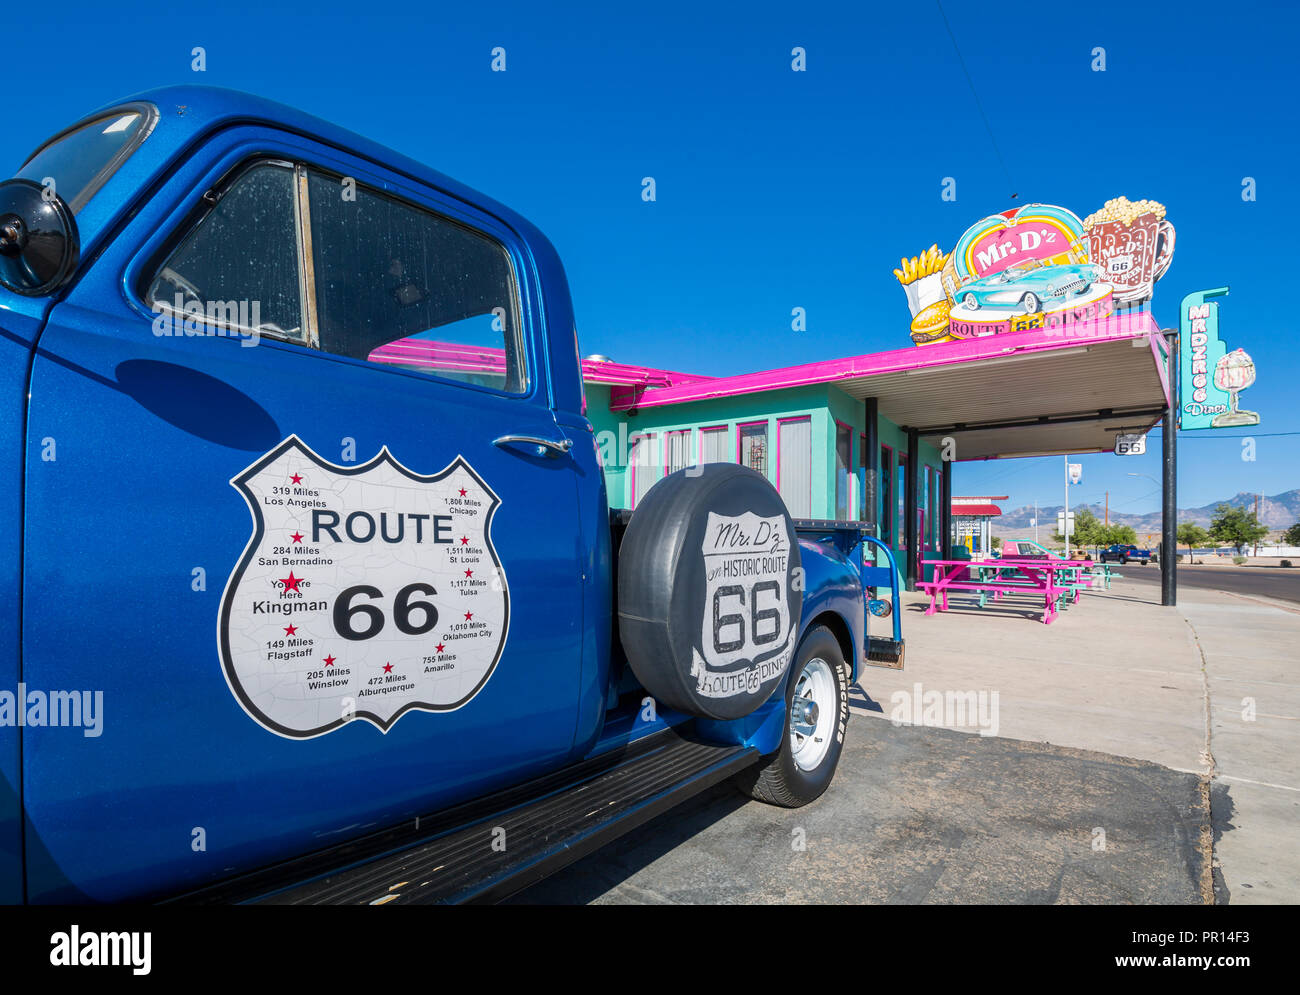 View of vintage station wagon and Mr D'z Diner on Route 66 in Kingman, Arizona, United States of America, North America Stock Photo